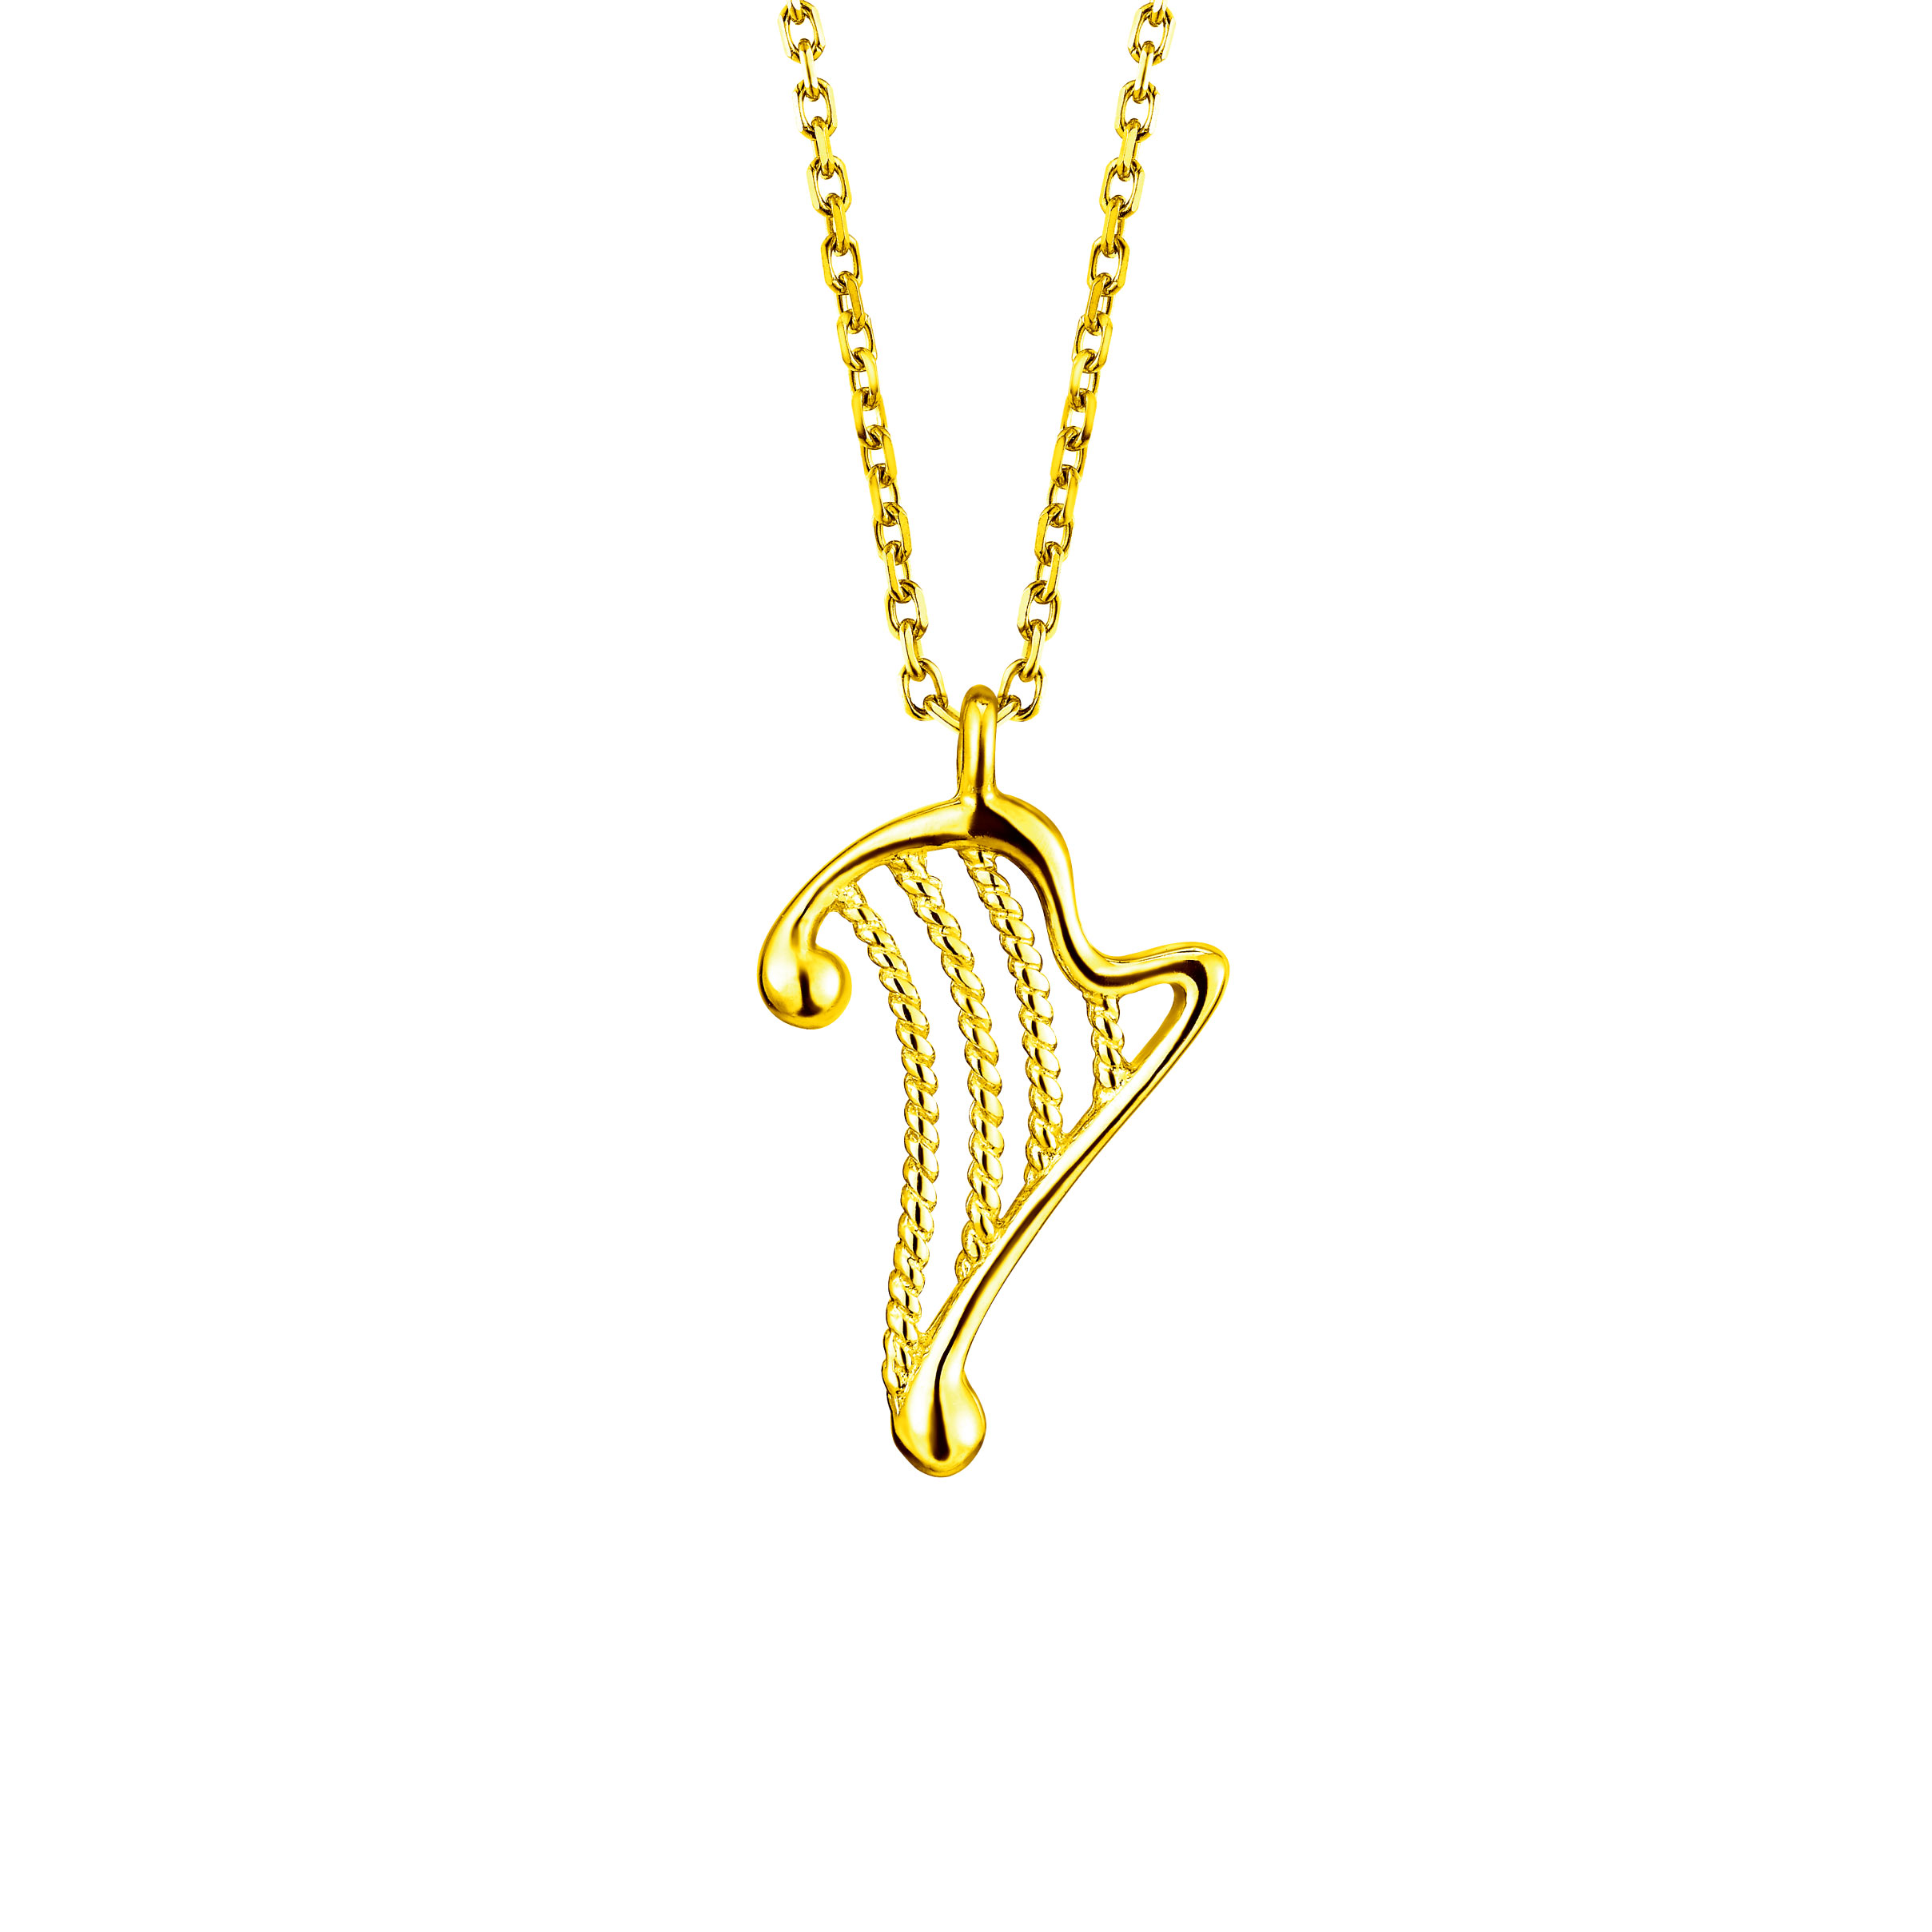 Goldstyle Enchanted Lyre Necklace 